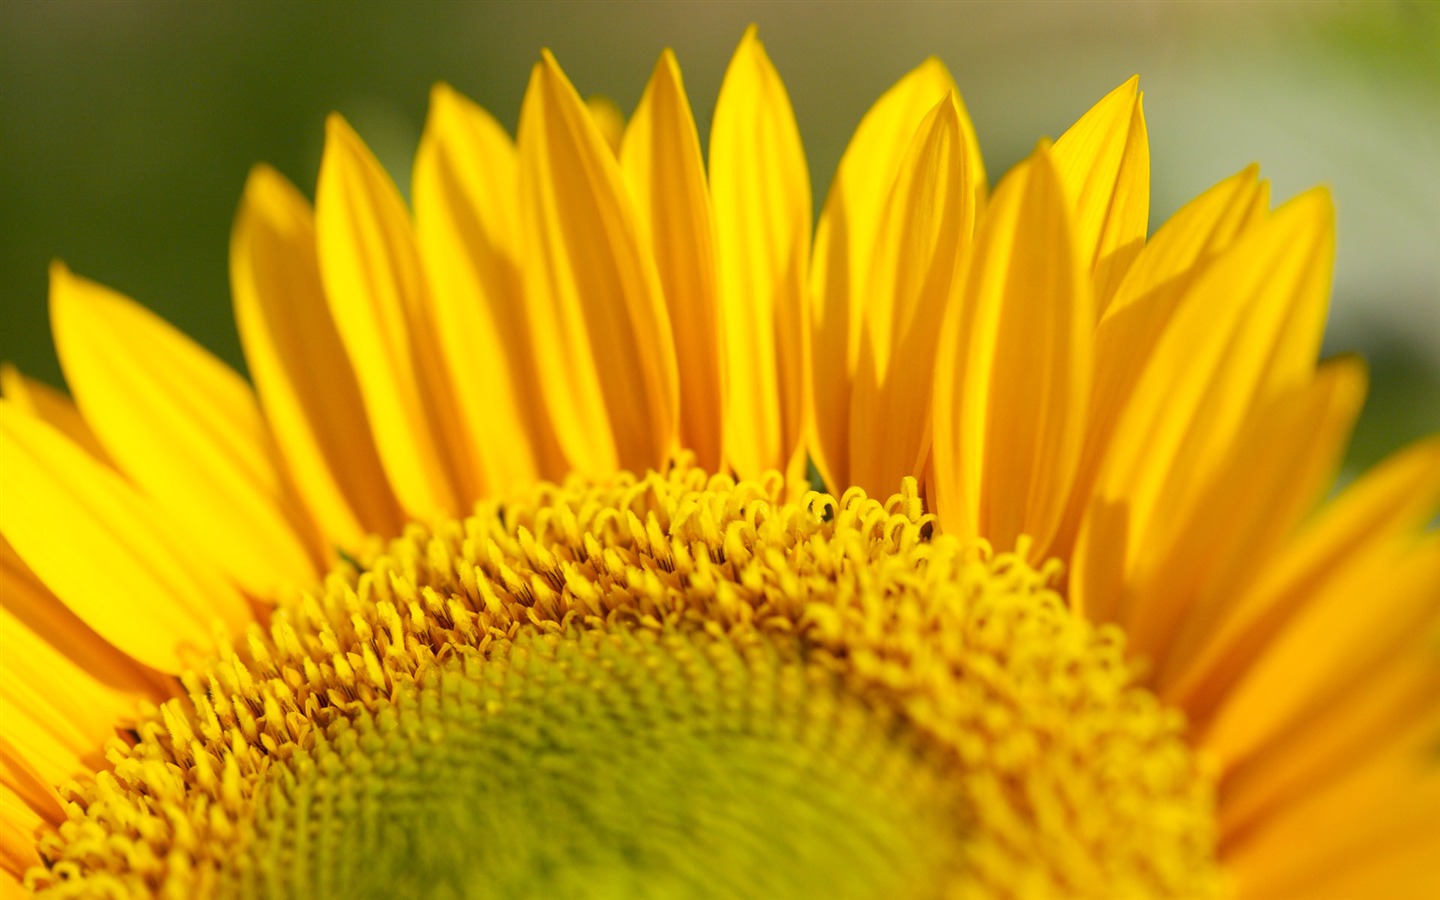 Sunny sunflower photo HD Wallpapers #29 - 1440x900